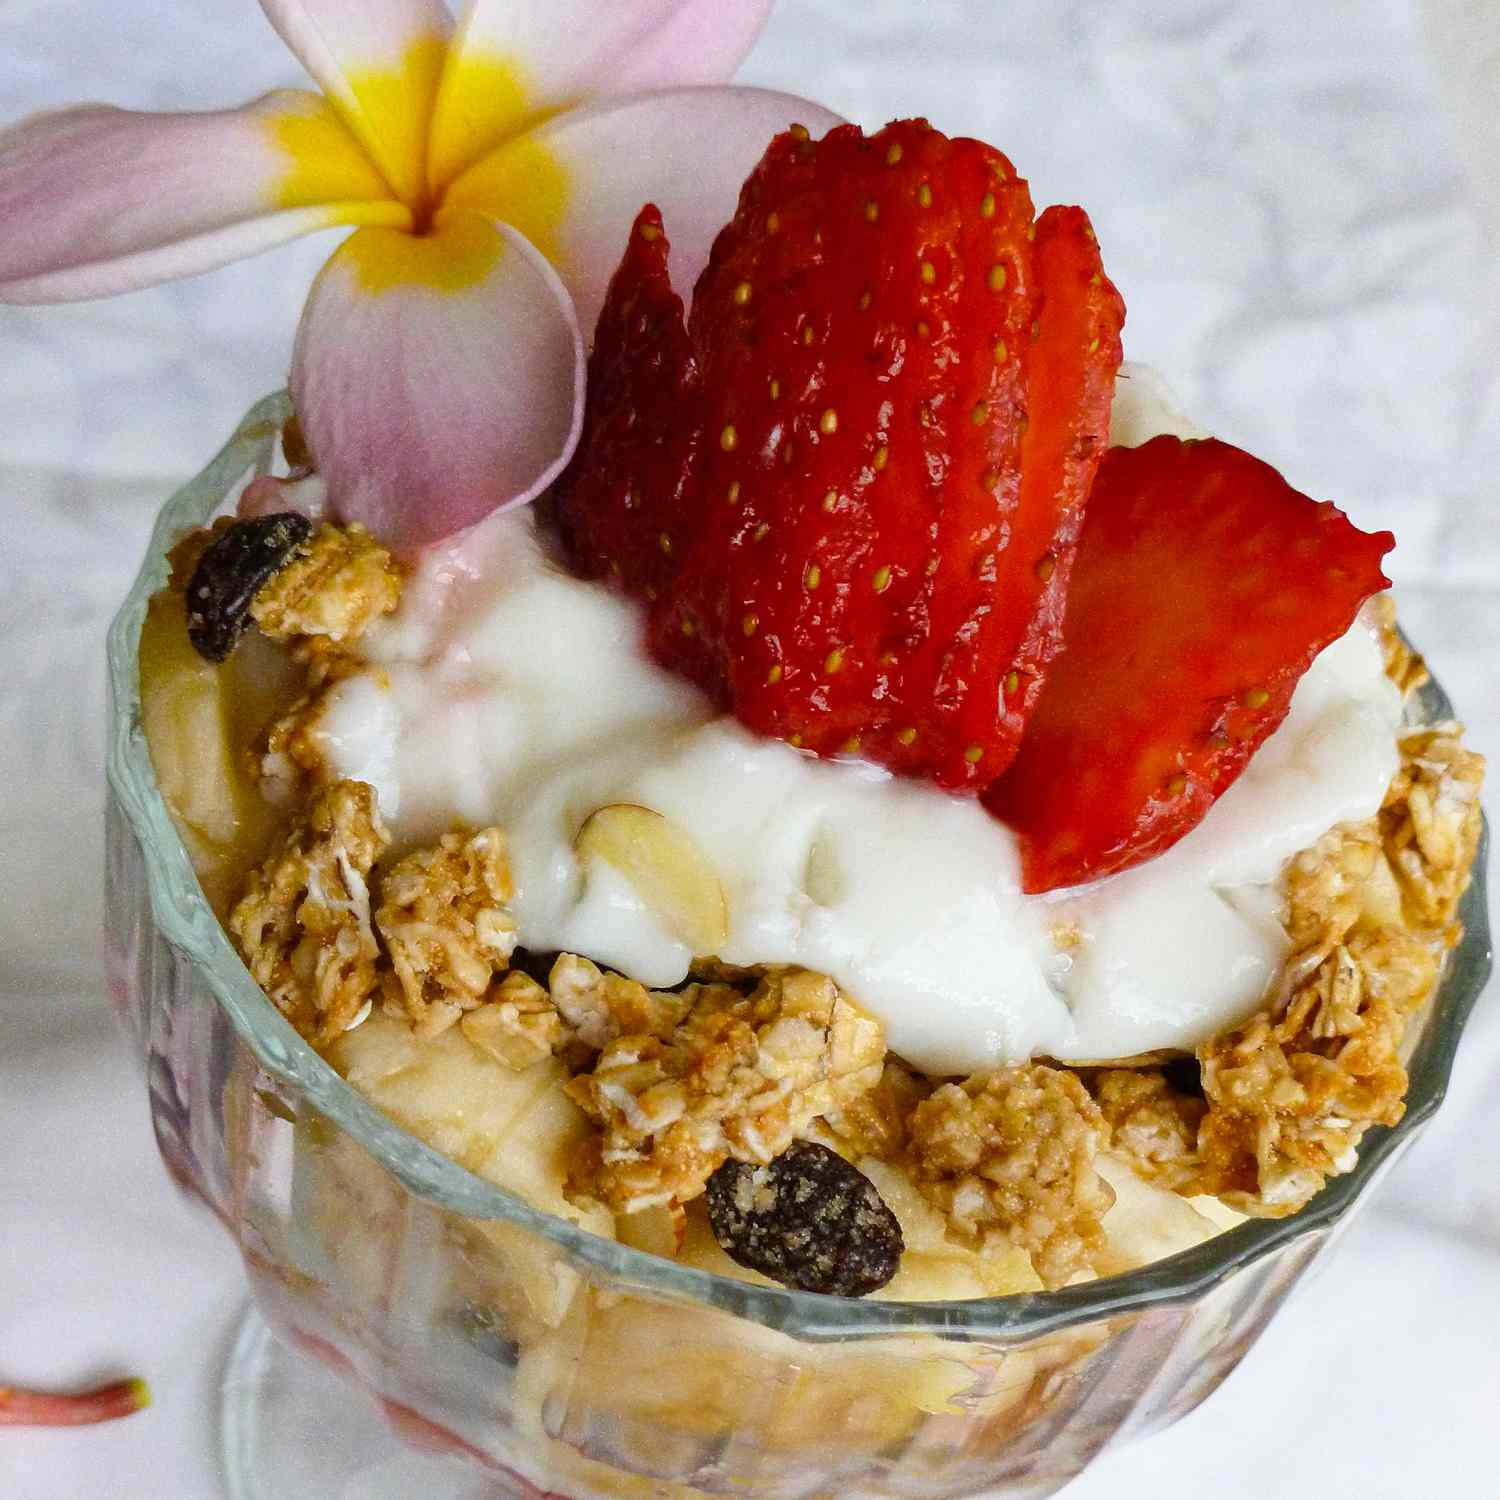 close up view of a Summer Berry Parfait with Yogurt and Granola garnished with a sliced strawberry and a flower in a glass bowl